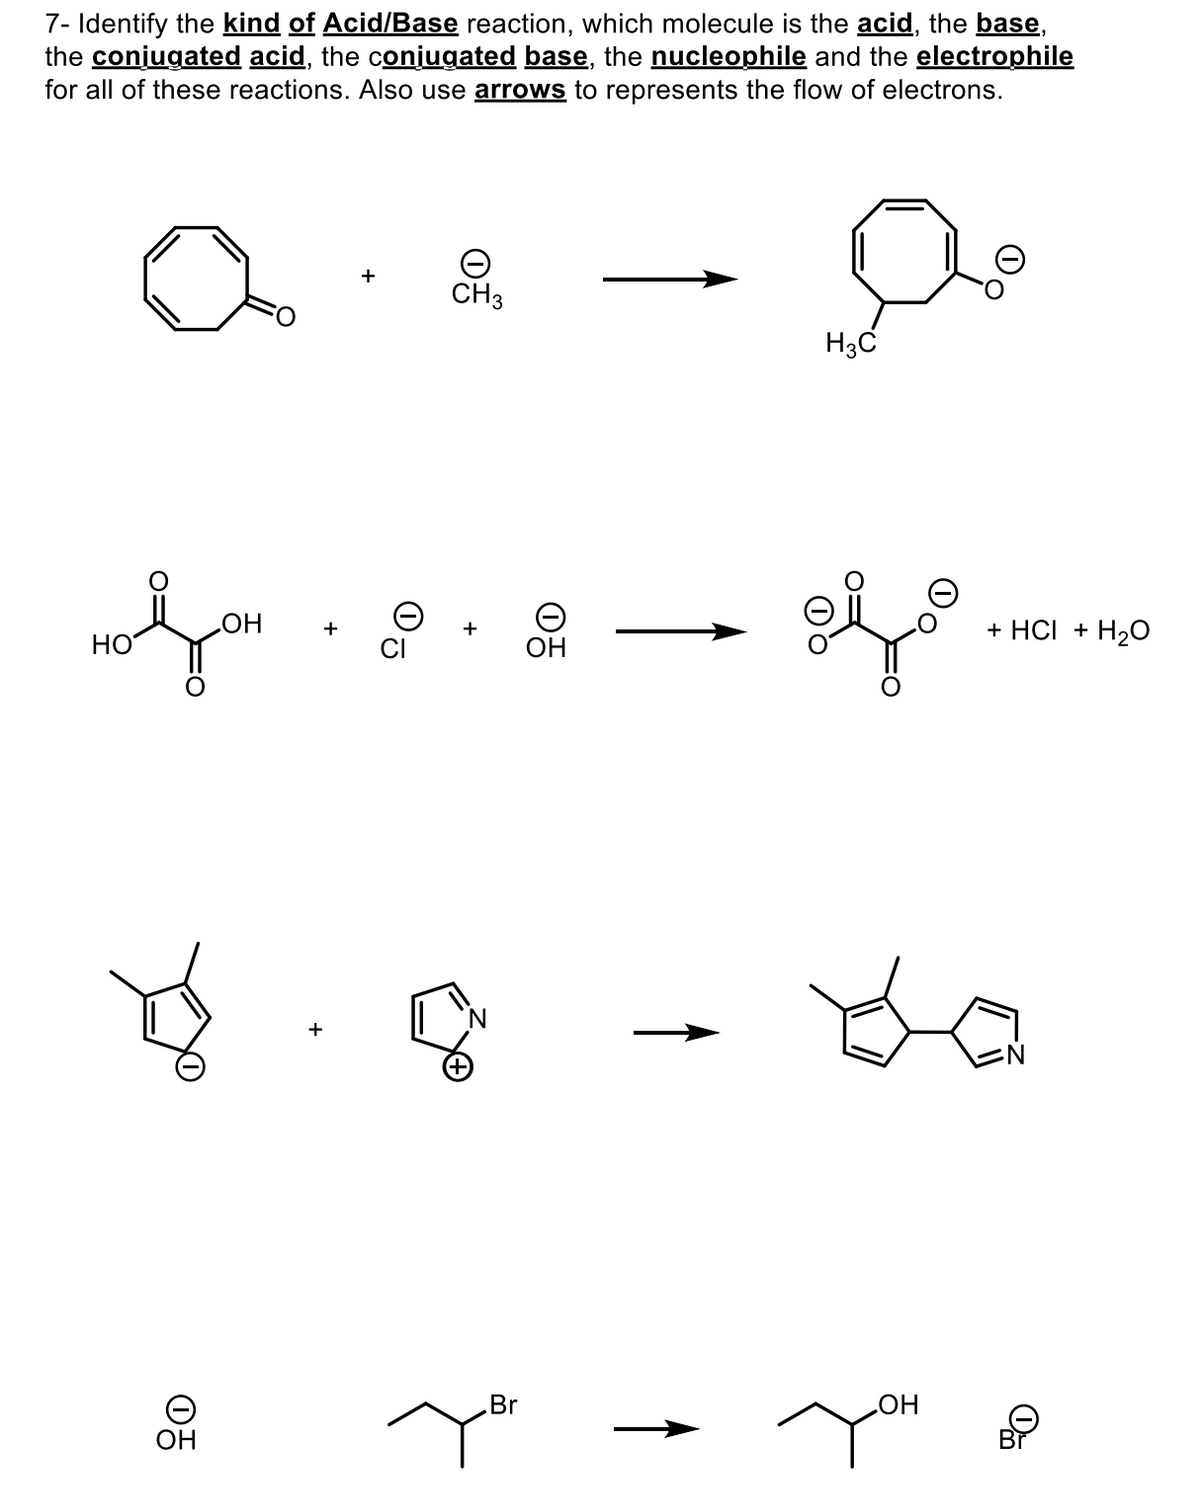 7- Identify the kind of Acid/Base reaction, which molecule is the acid, the base,
the conjugated acid, the conjugated base, the nucleophile and the electrophile
for all of these reactions. Also use arrows to represents the flow of electrons.
Θ
CH3
H3C
OH
HO
OH
of
+ HCI + H2O
Br
OH
.OH
D